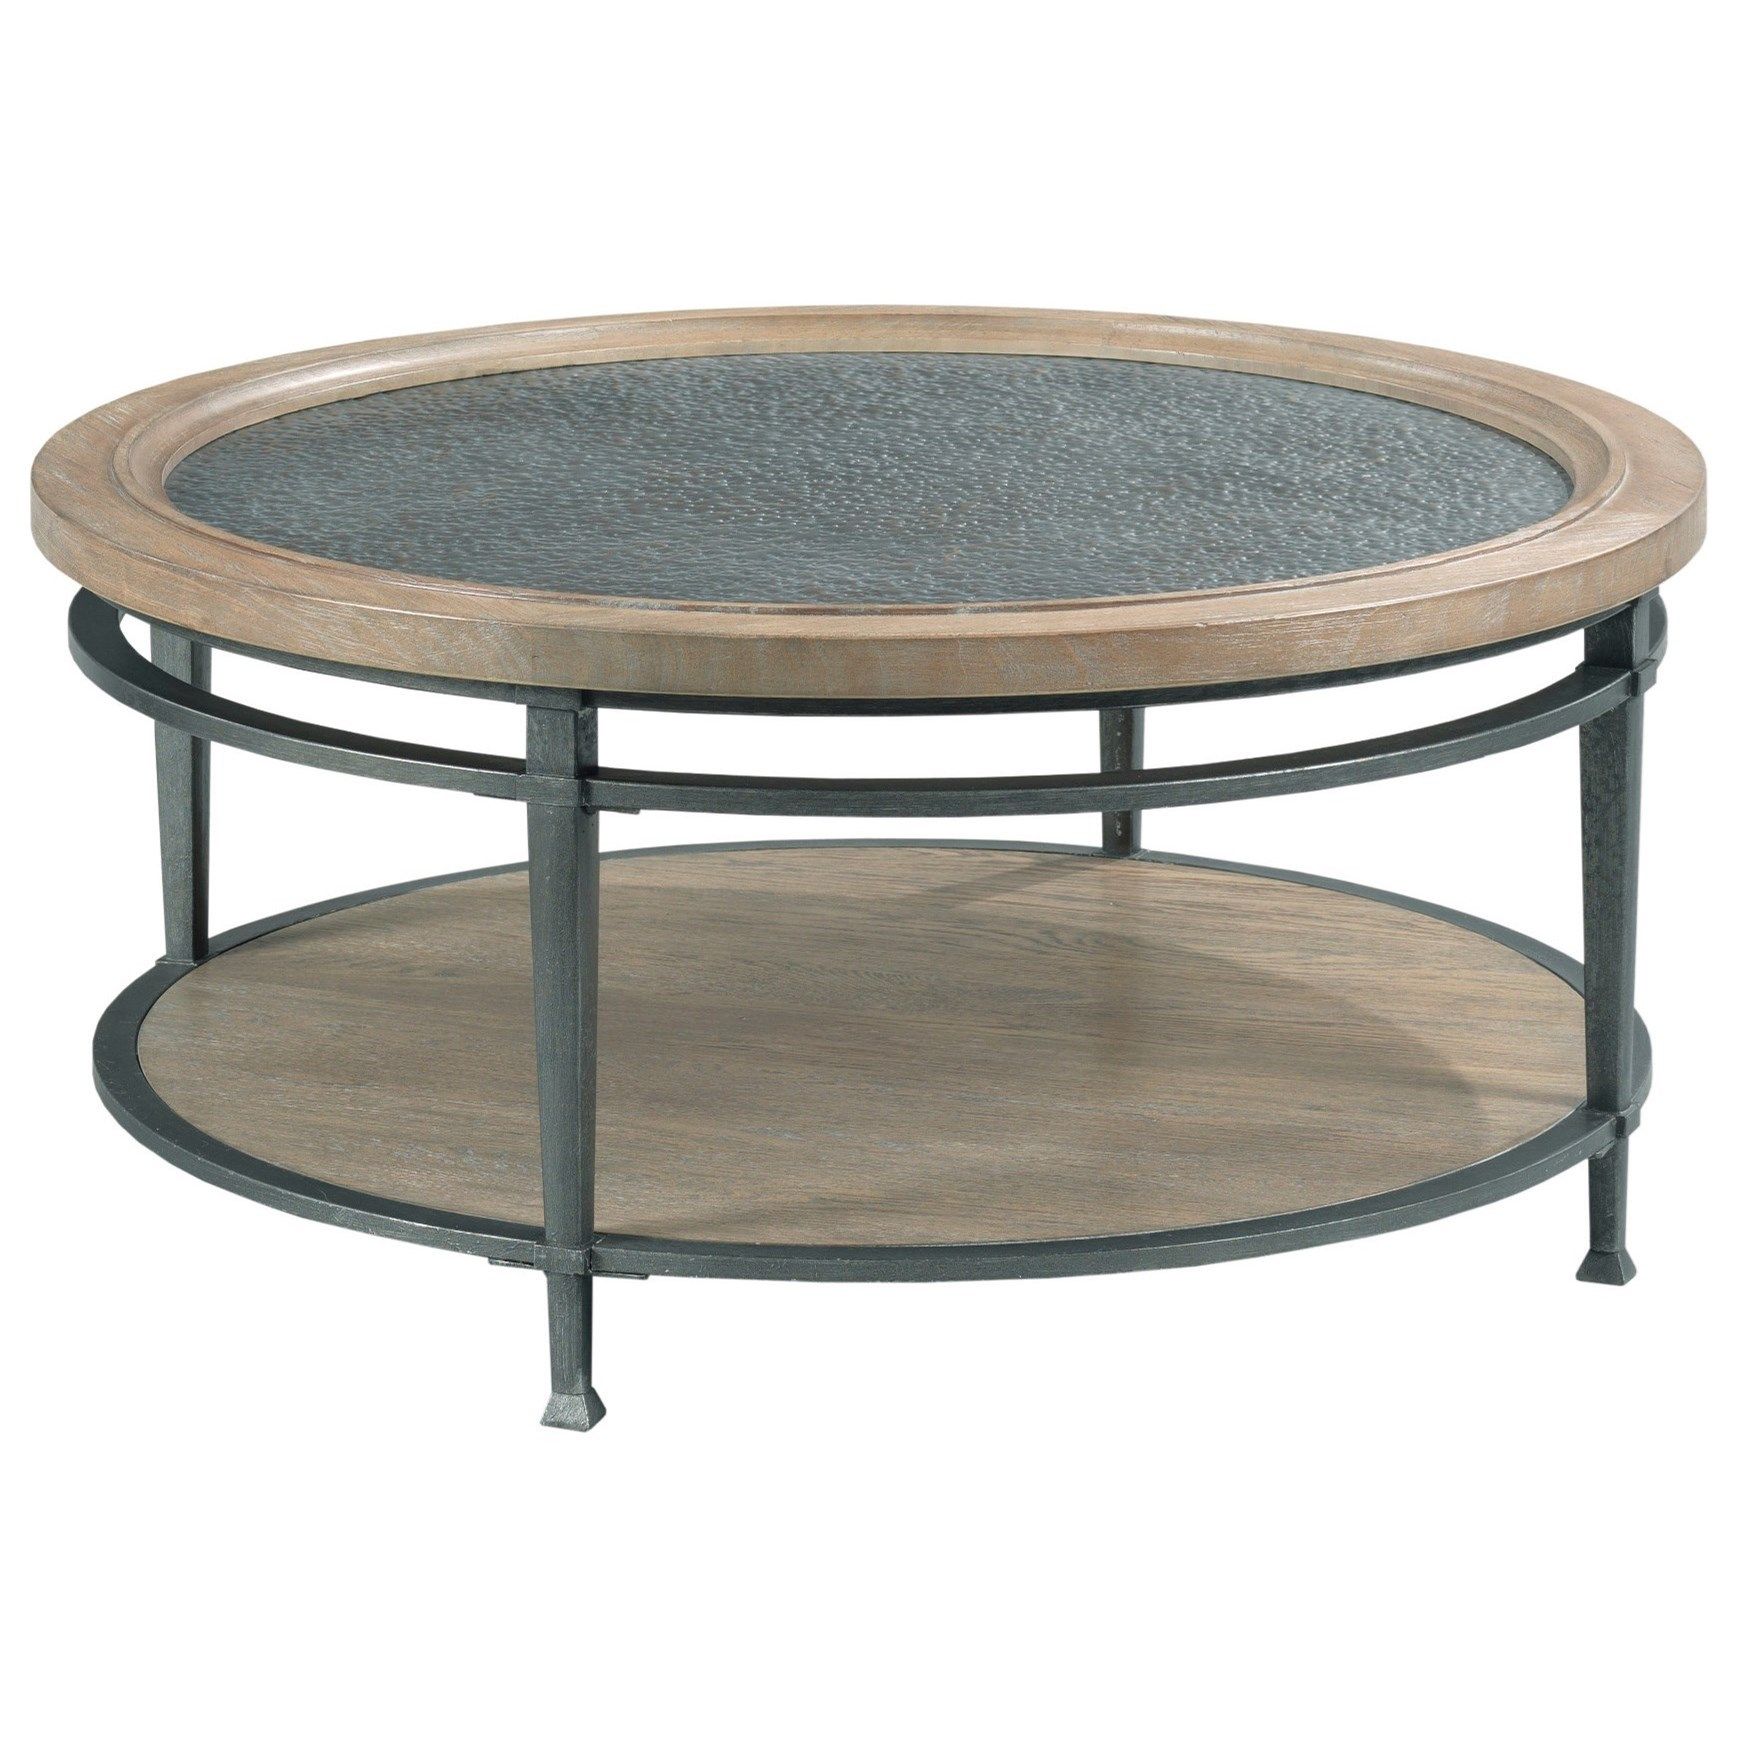 Hammary Austin Transitional Round Coffee Table | Wilson's Furniture Inside American Heritage Round Coffee Tables (View 10 of 20)